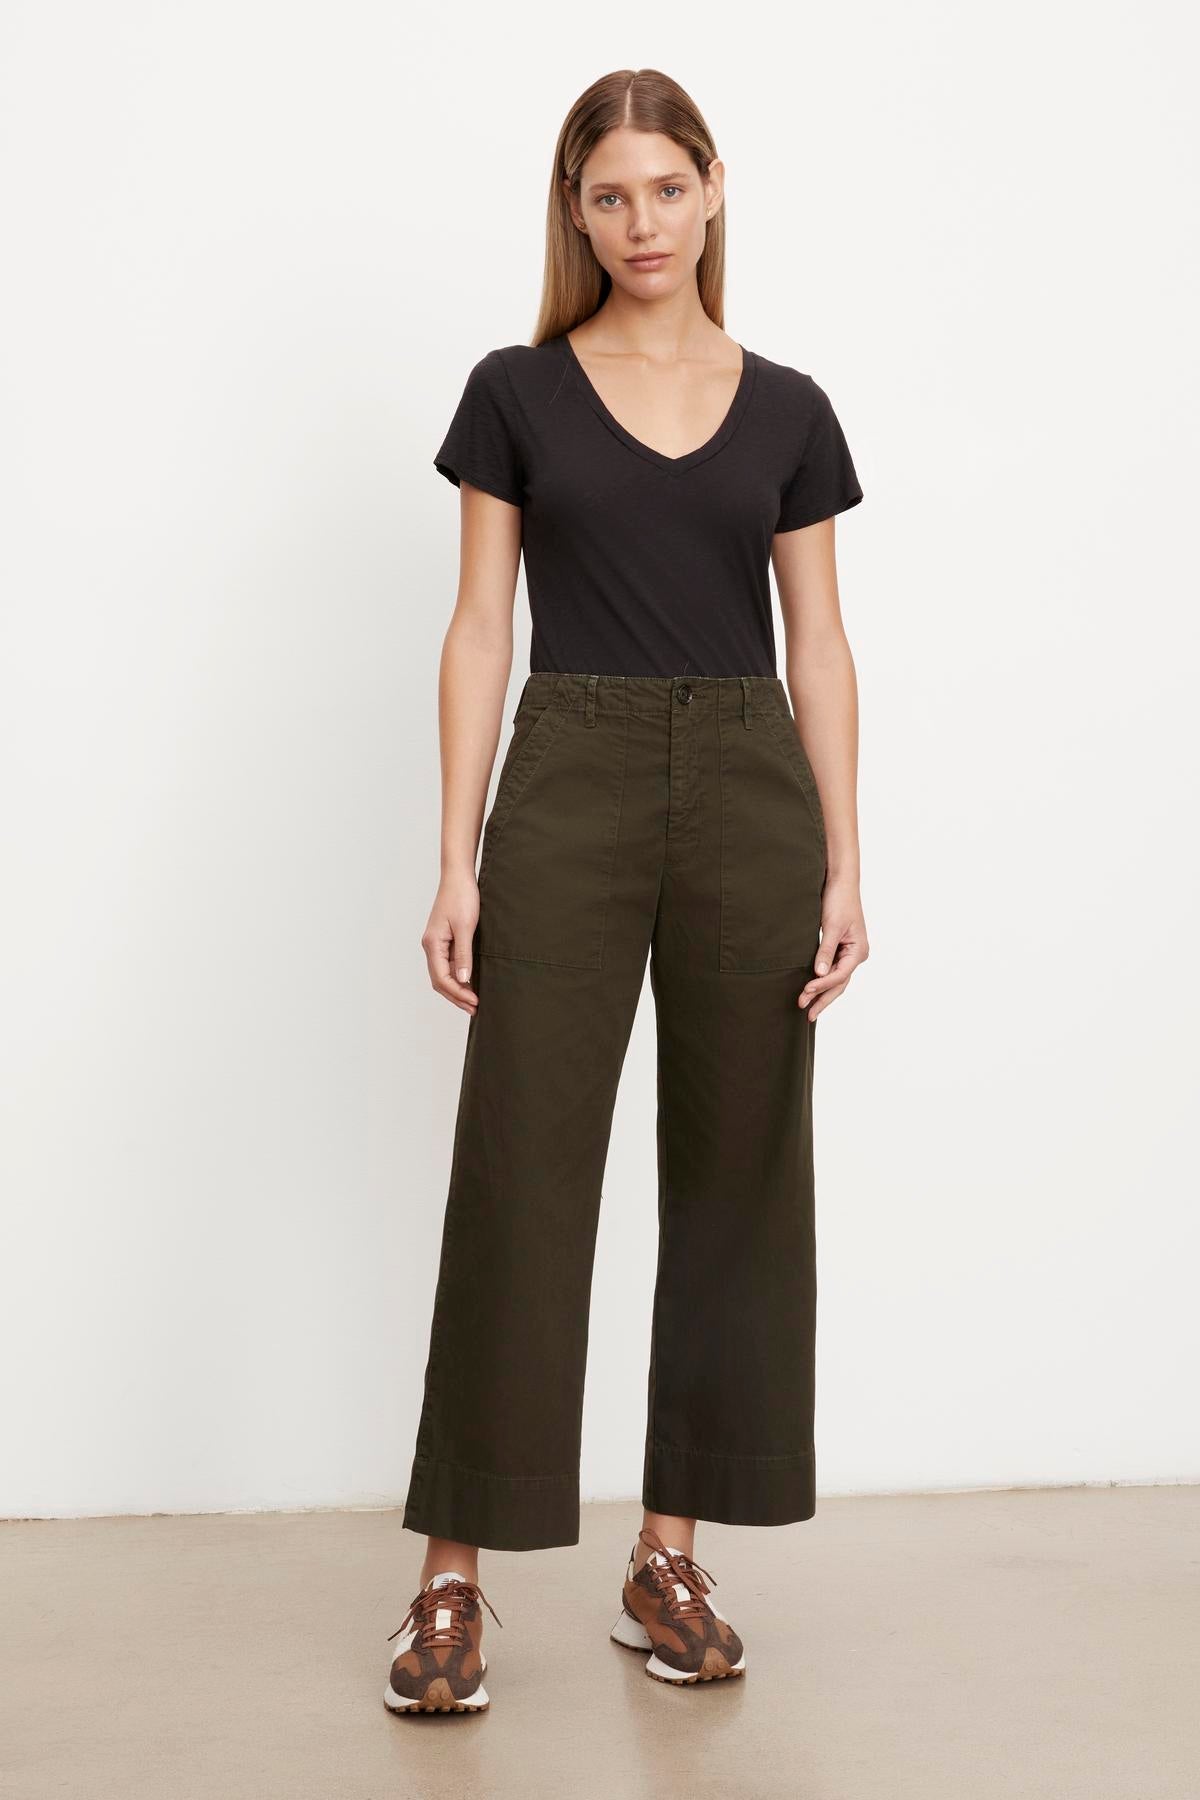   A person wearing a Velvet by Graham & Spencer slim top and Velvet by Graham & Spencer cropped trousers in olive green. 